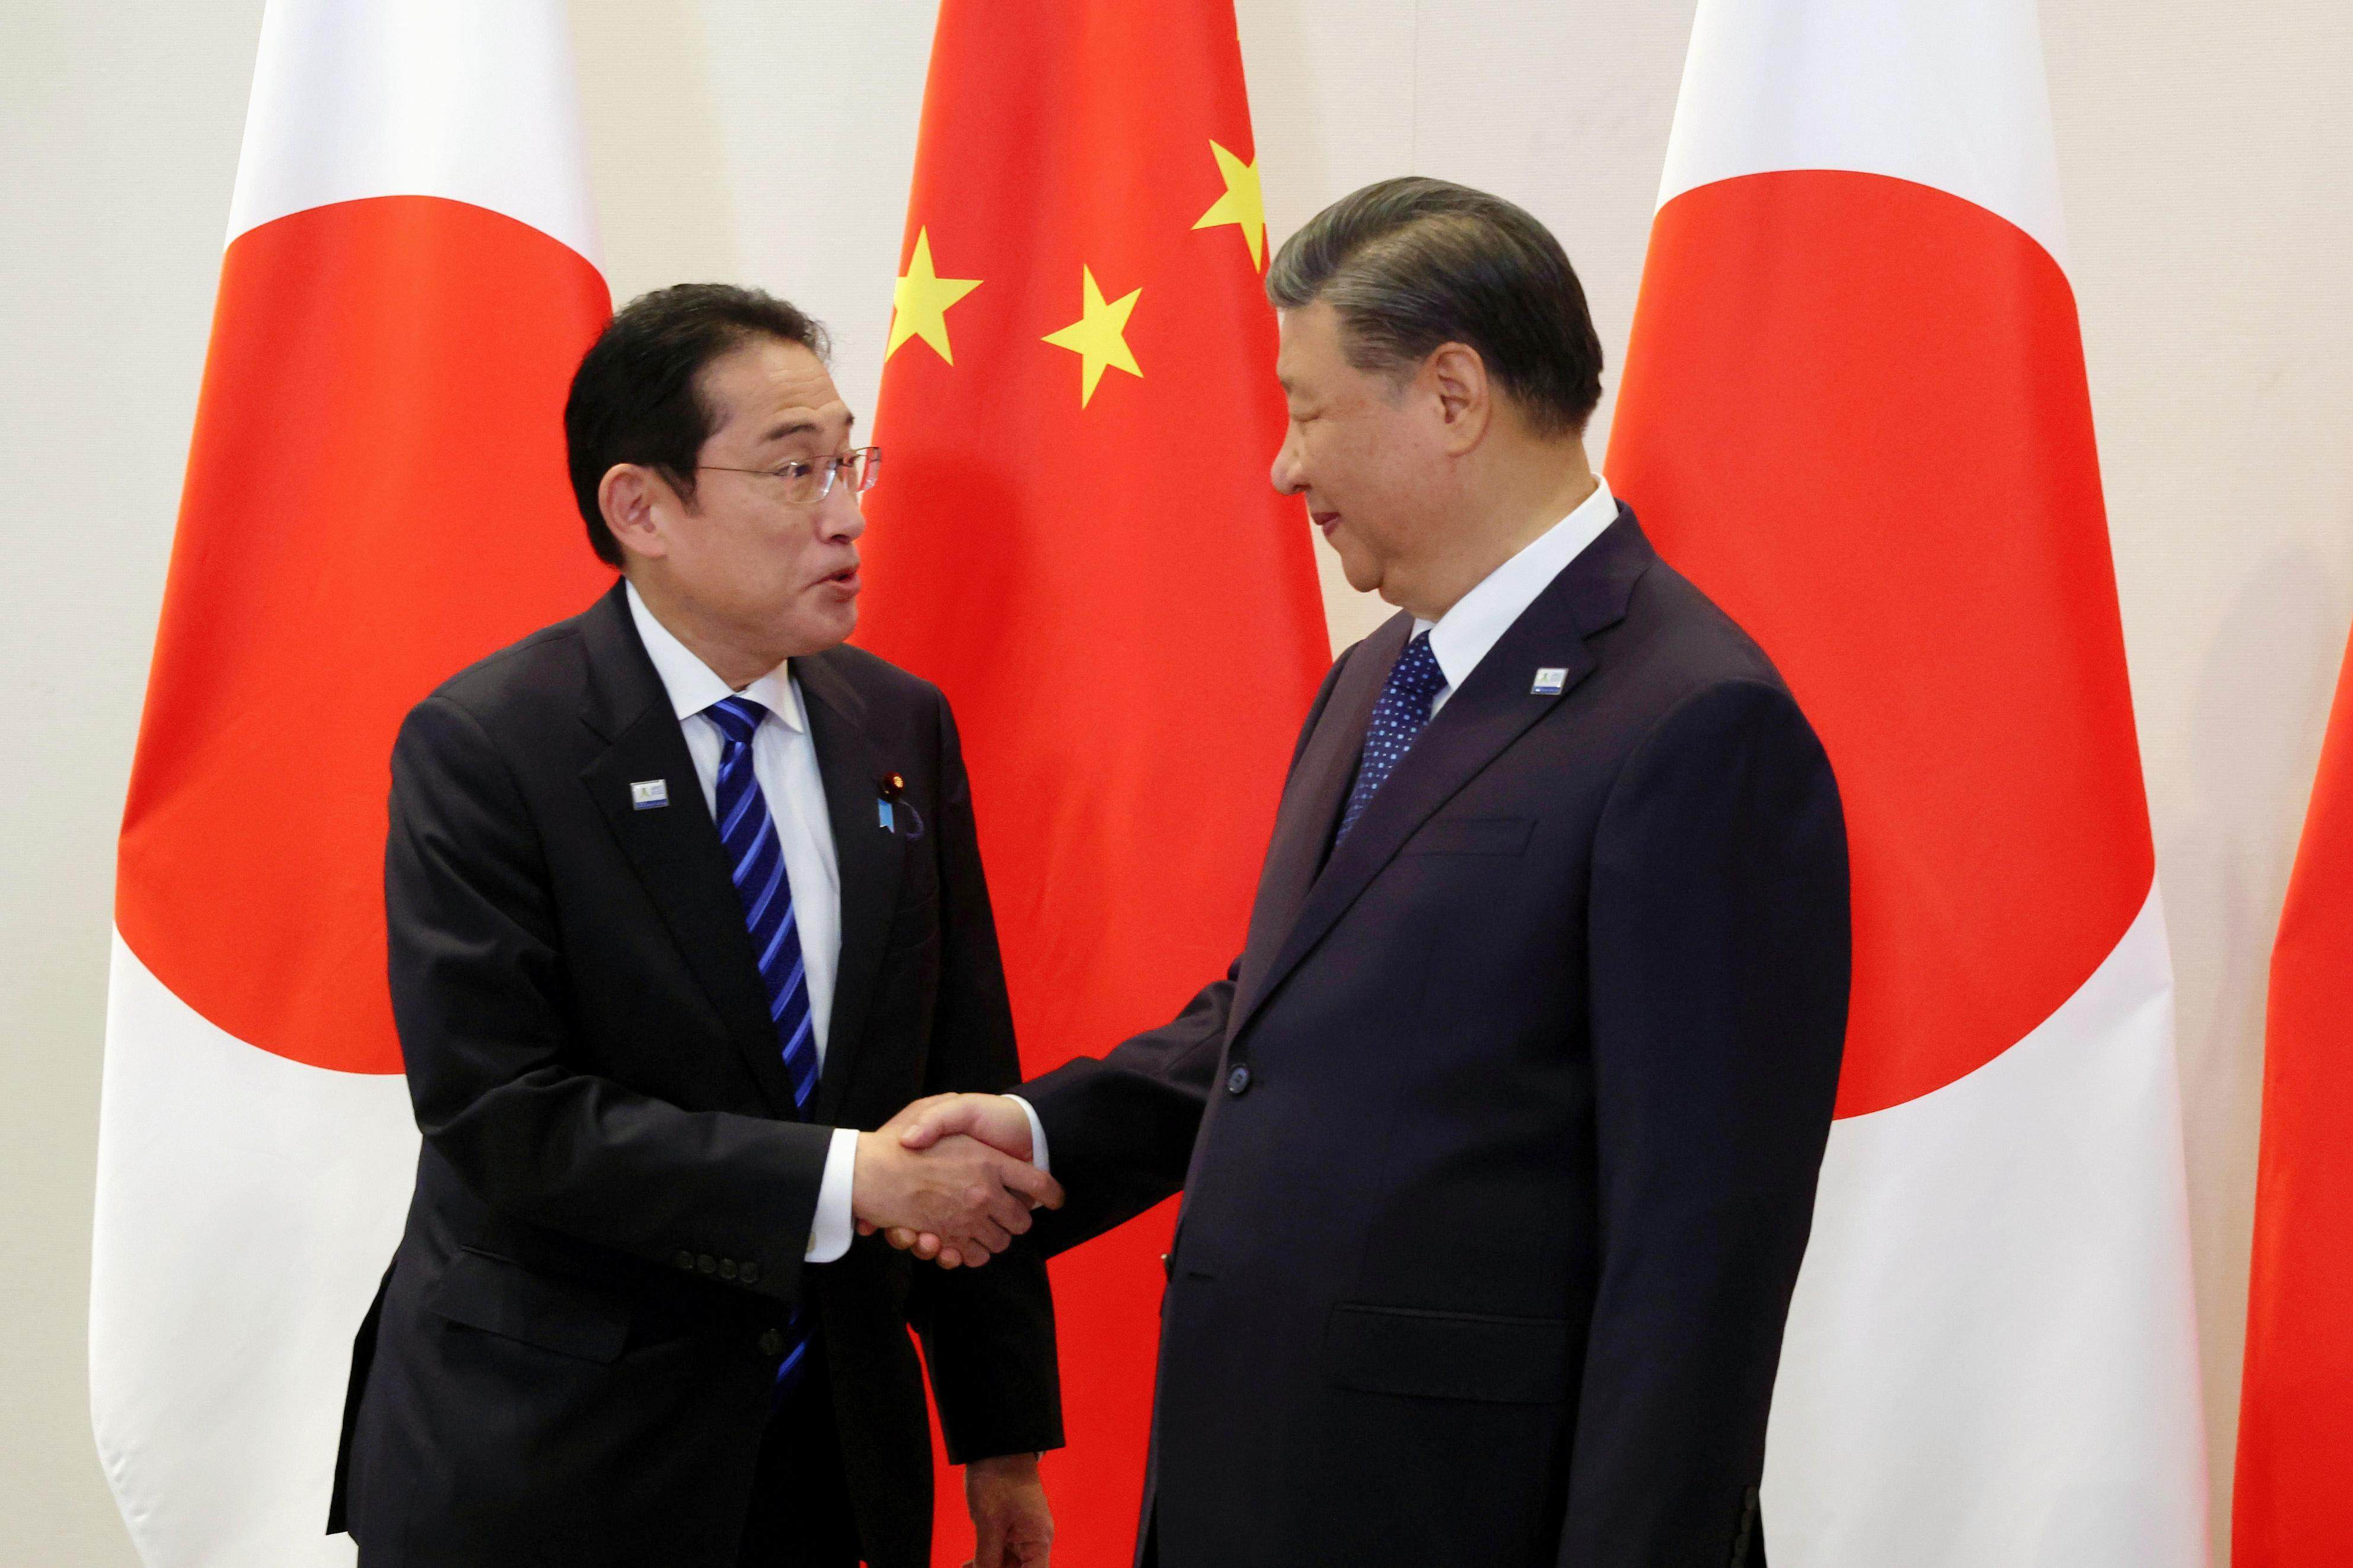 Japanese Prime Minister Fumio Kishida (left) shakes hands with Chinese President Xi Jinping during their meeting in San Francisco, on November 16, on the sidelines of the Asia-Pacific Economic Cooperation forum summit. Photo: Kyodo